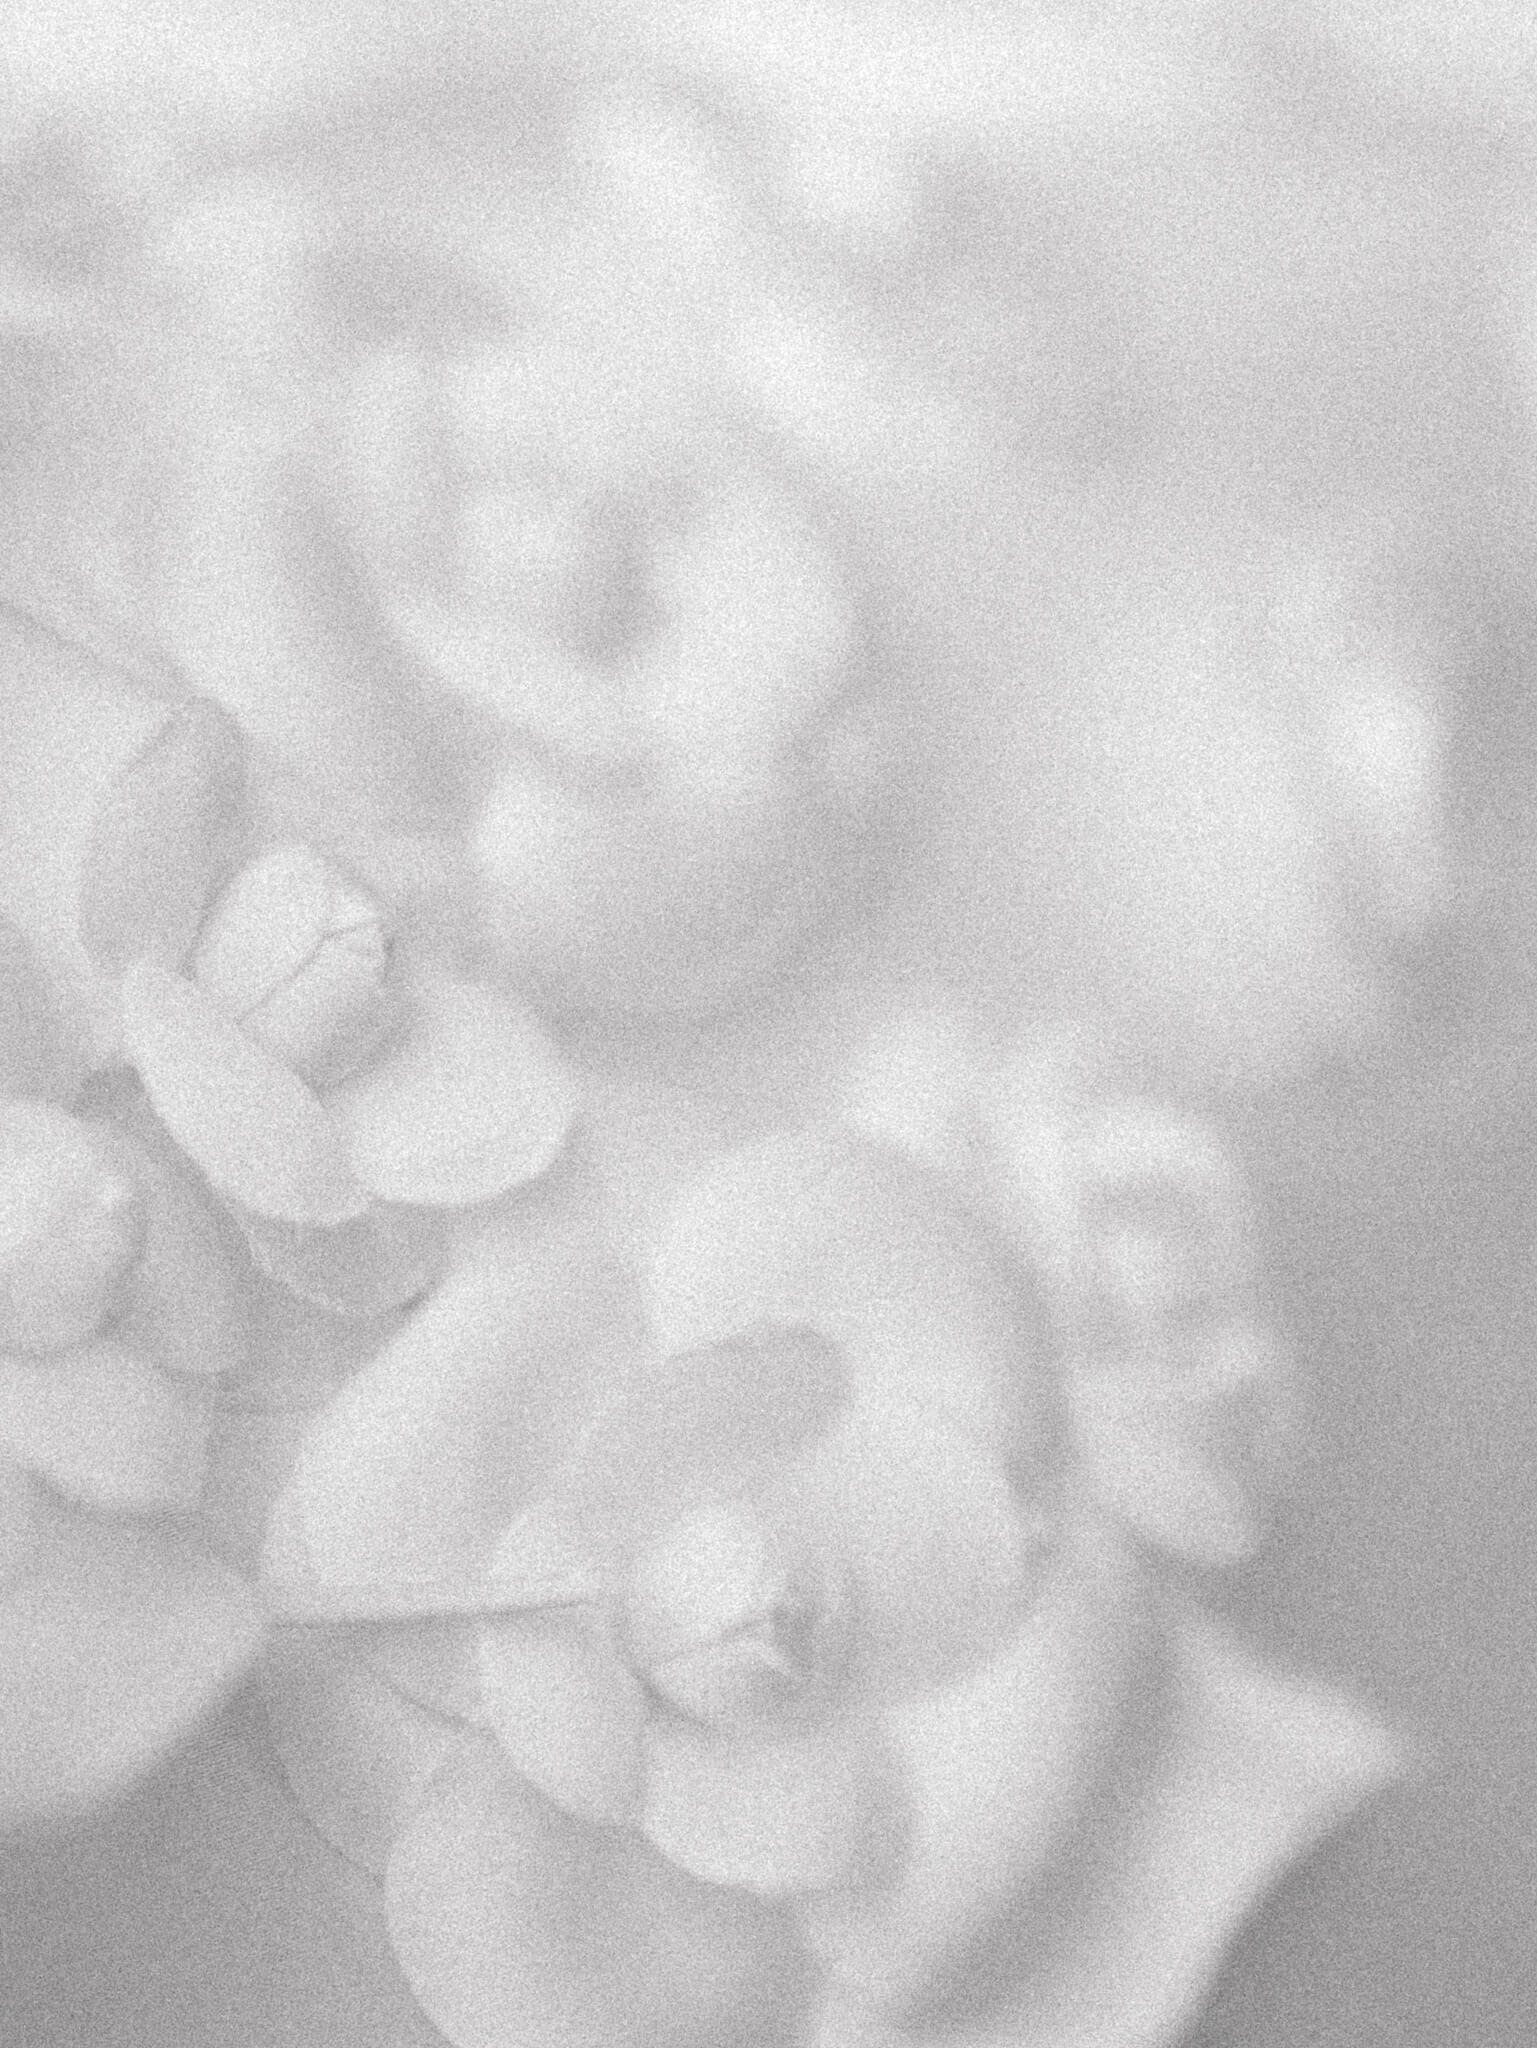 Black and white image of floral details on a bridal gown.